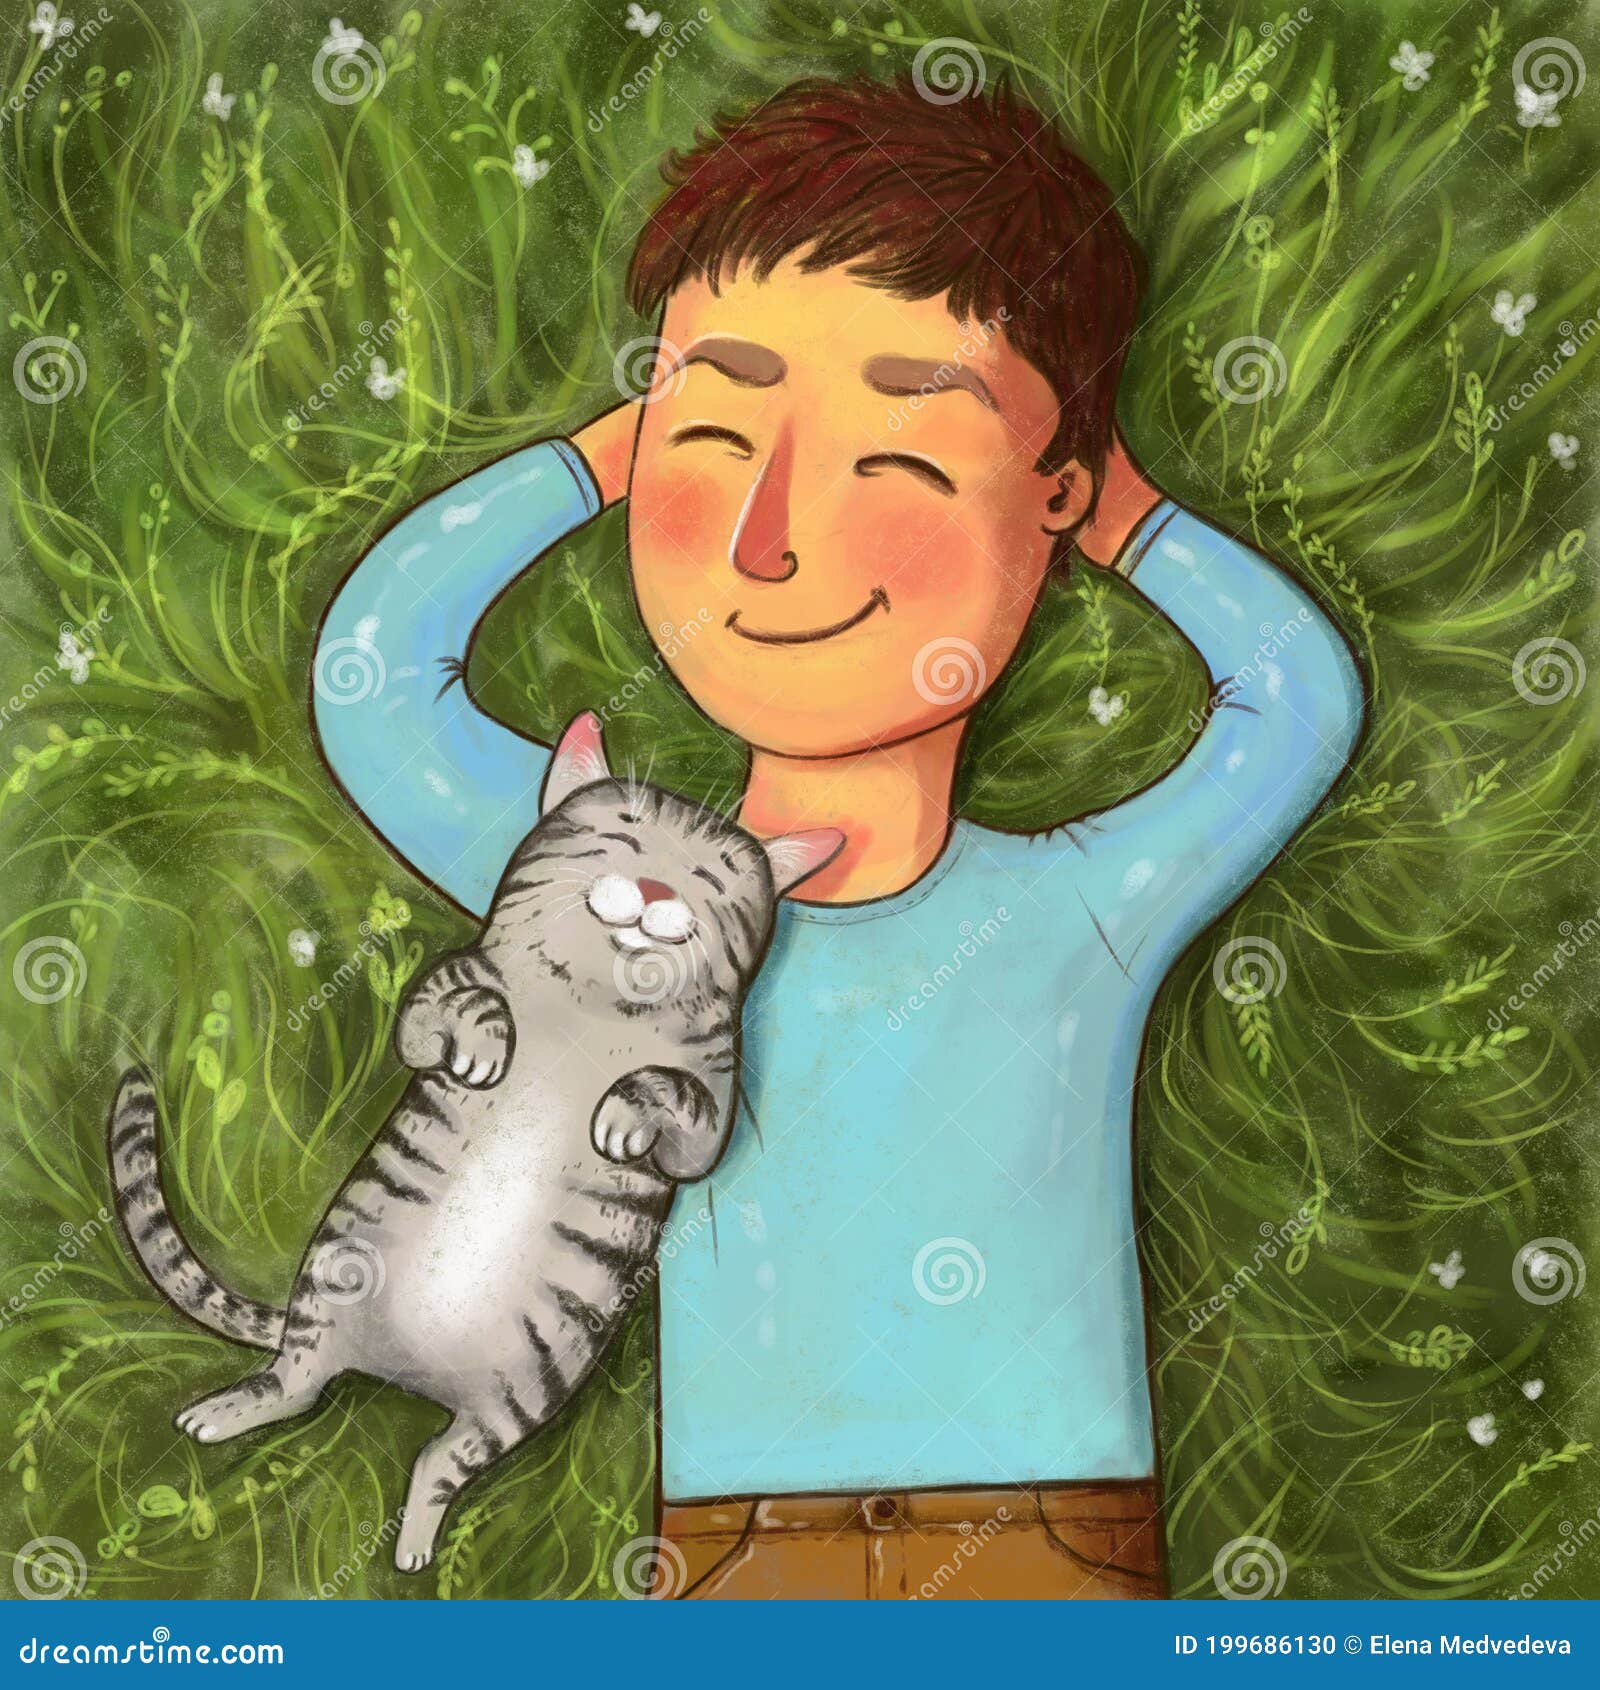 Illustration of a Cat and a Man Lying on the Grass with Smiles. Rest,  Friendship between Man and Cat Stock Illustration - Illustration of mammal,  hand: 199686130